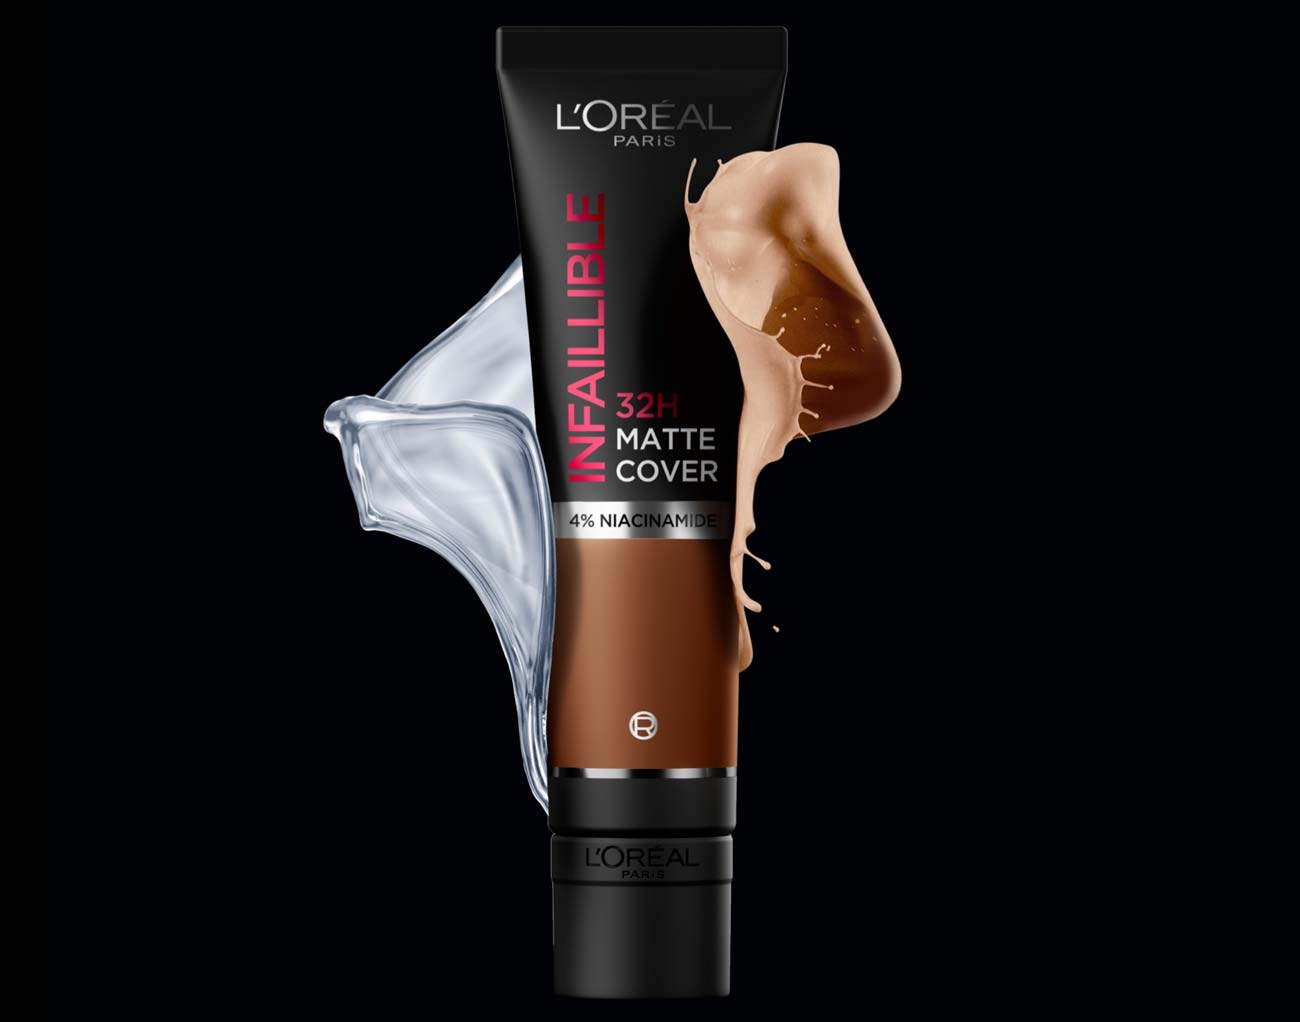 LOreal Infaillible 32H Matte Cover 1